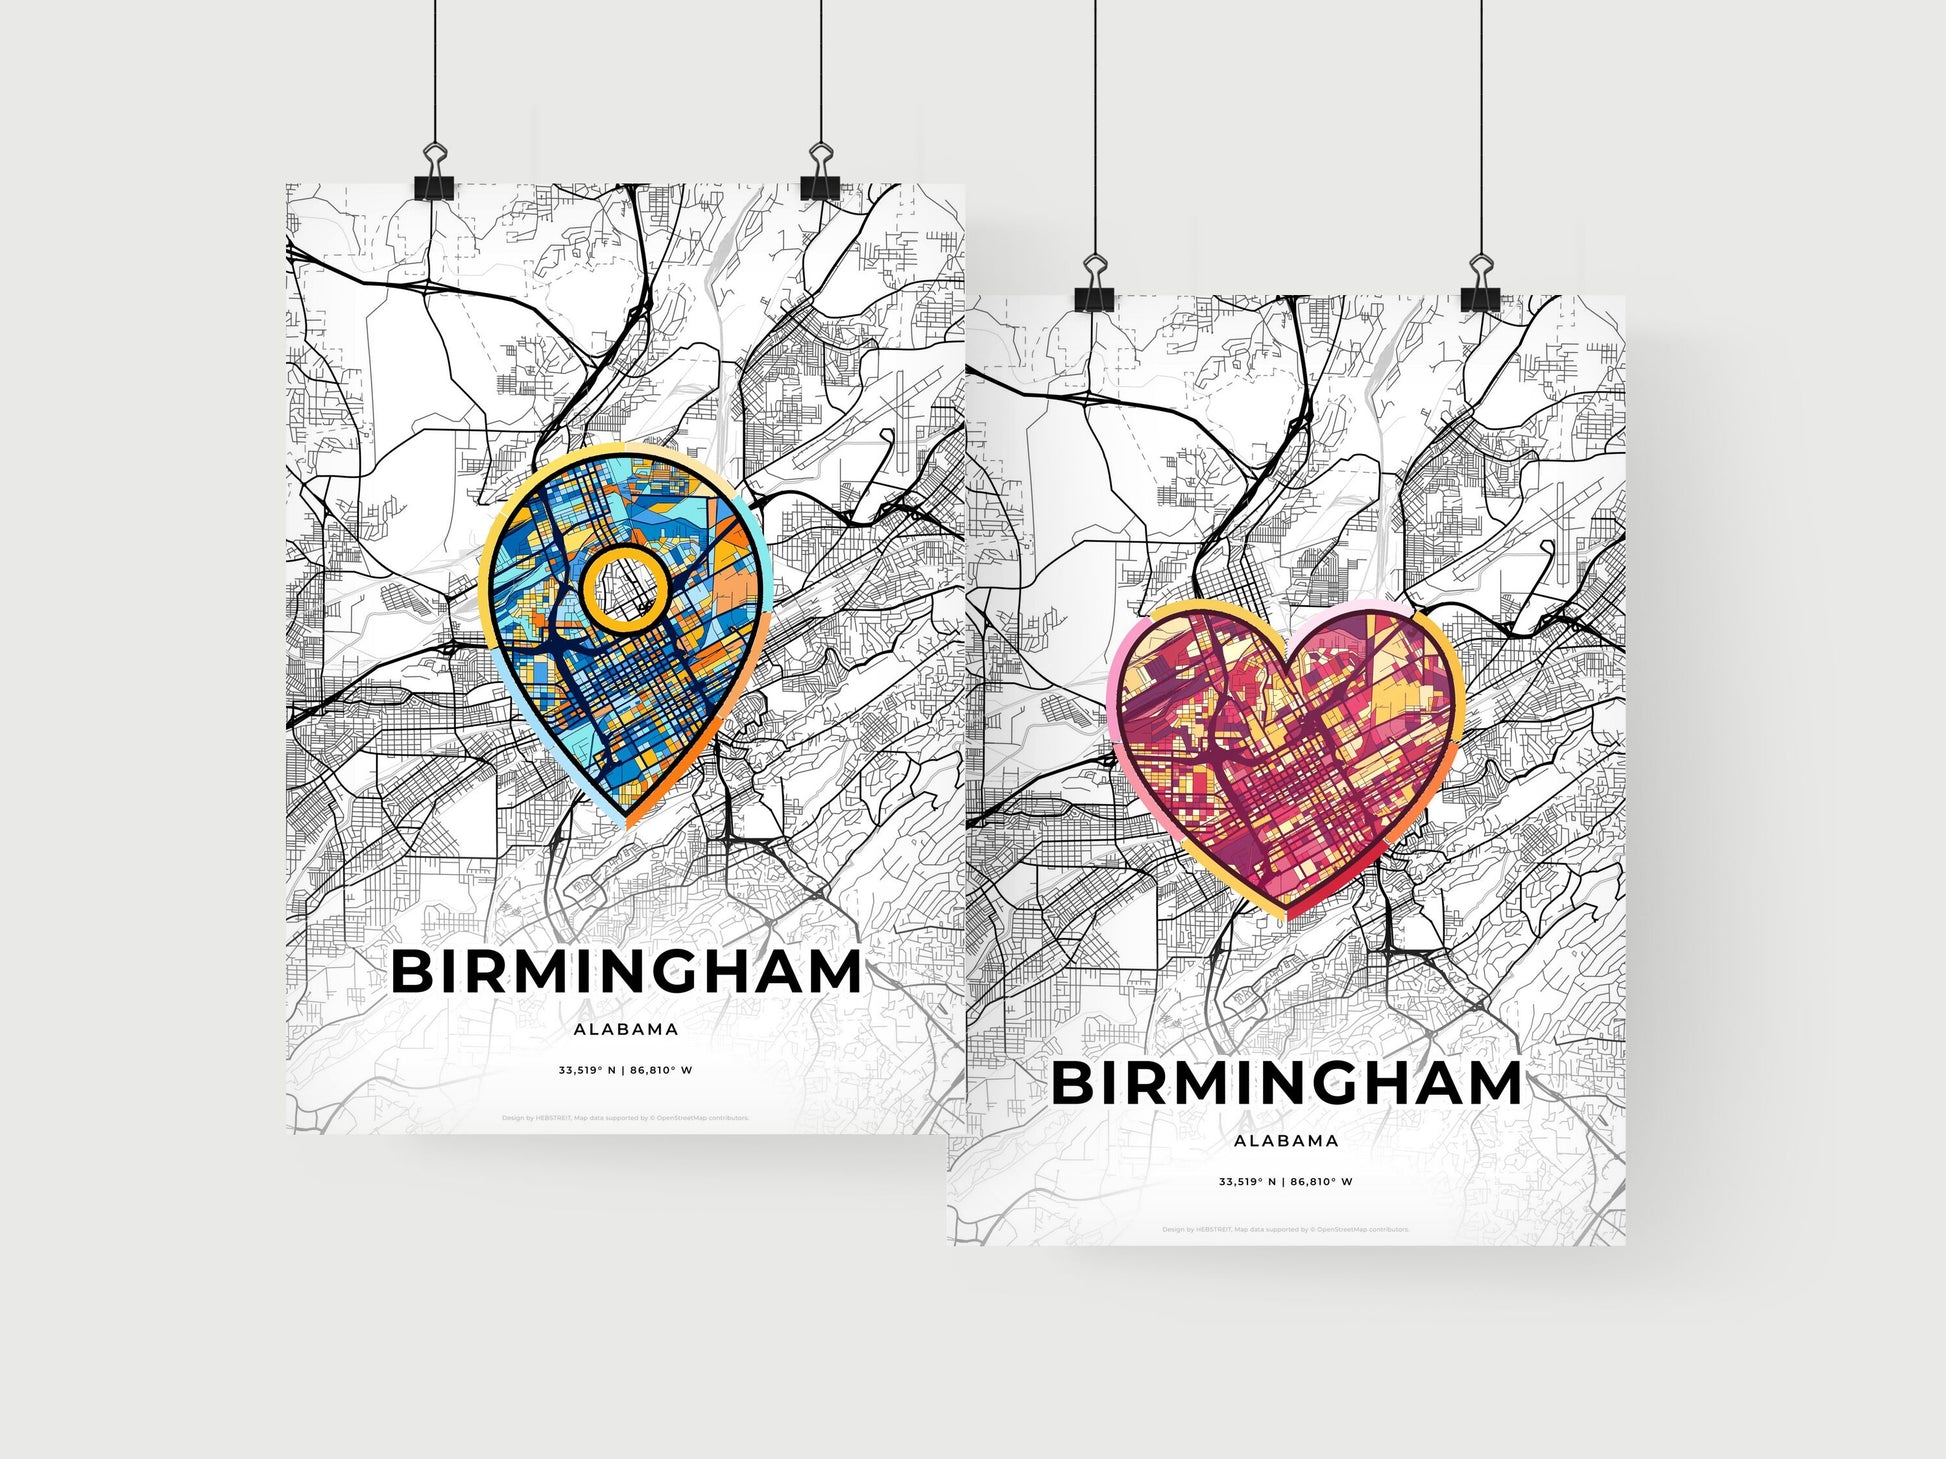 BIRMINGHAM ALABAMA minimal art map with a colorful icon. Where it all began, Couple map gift.